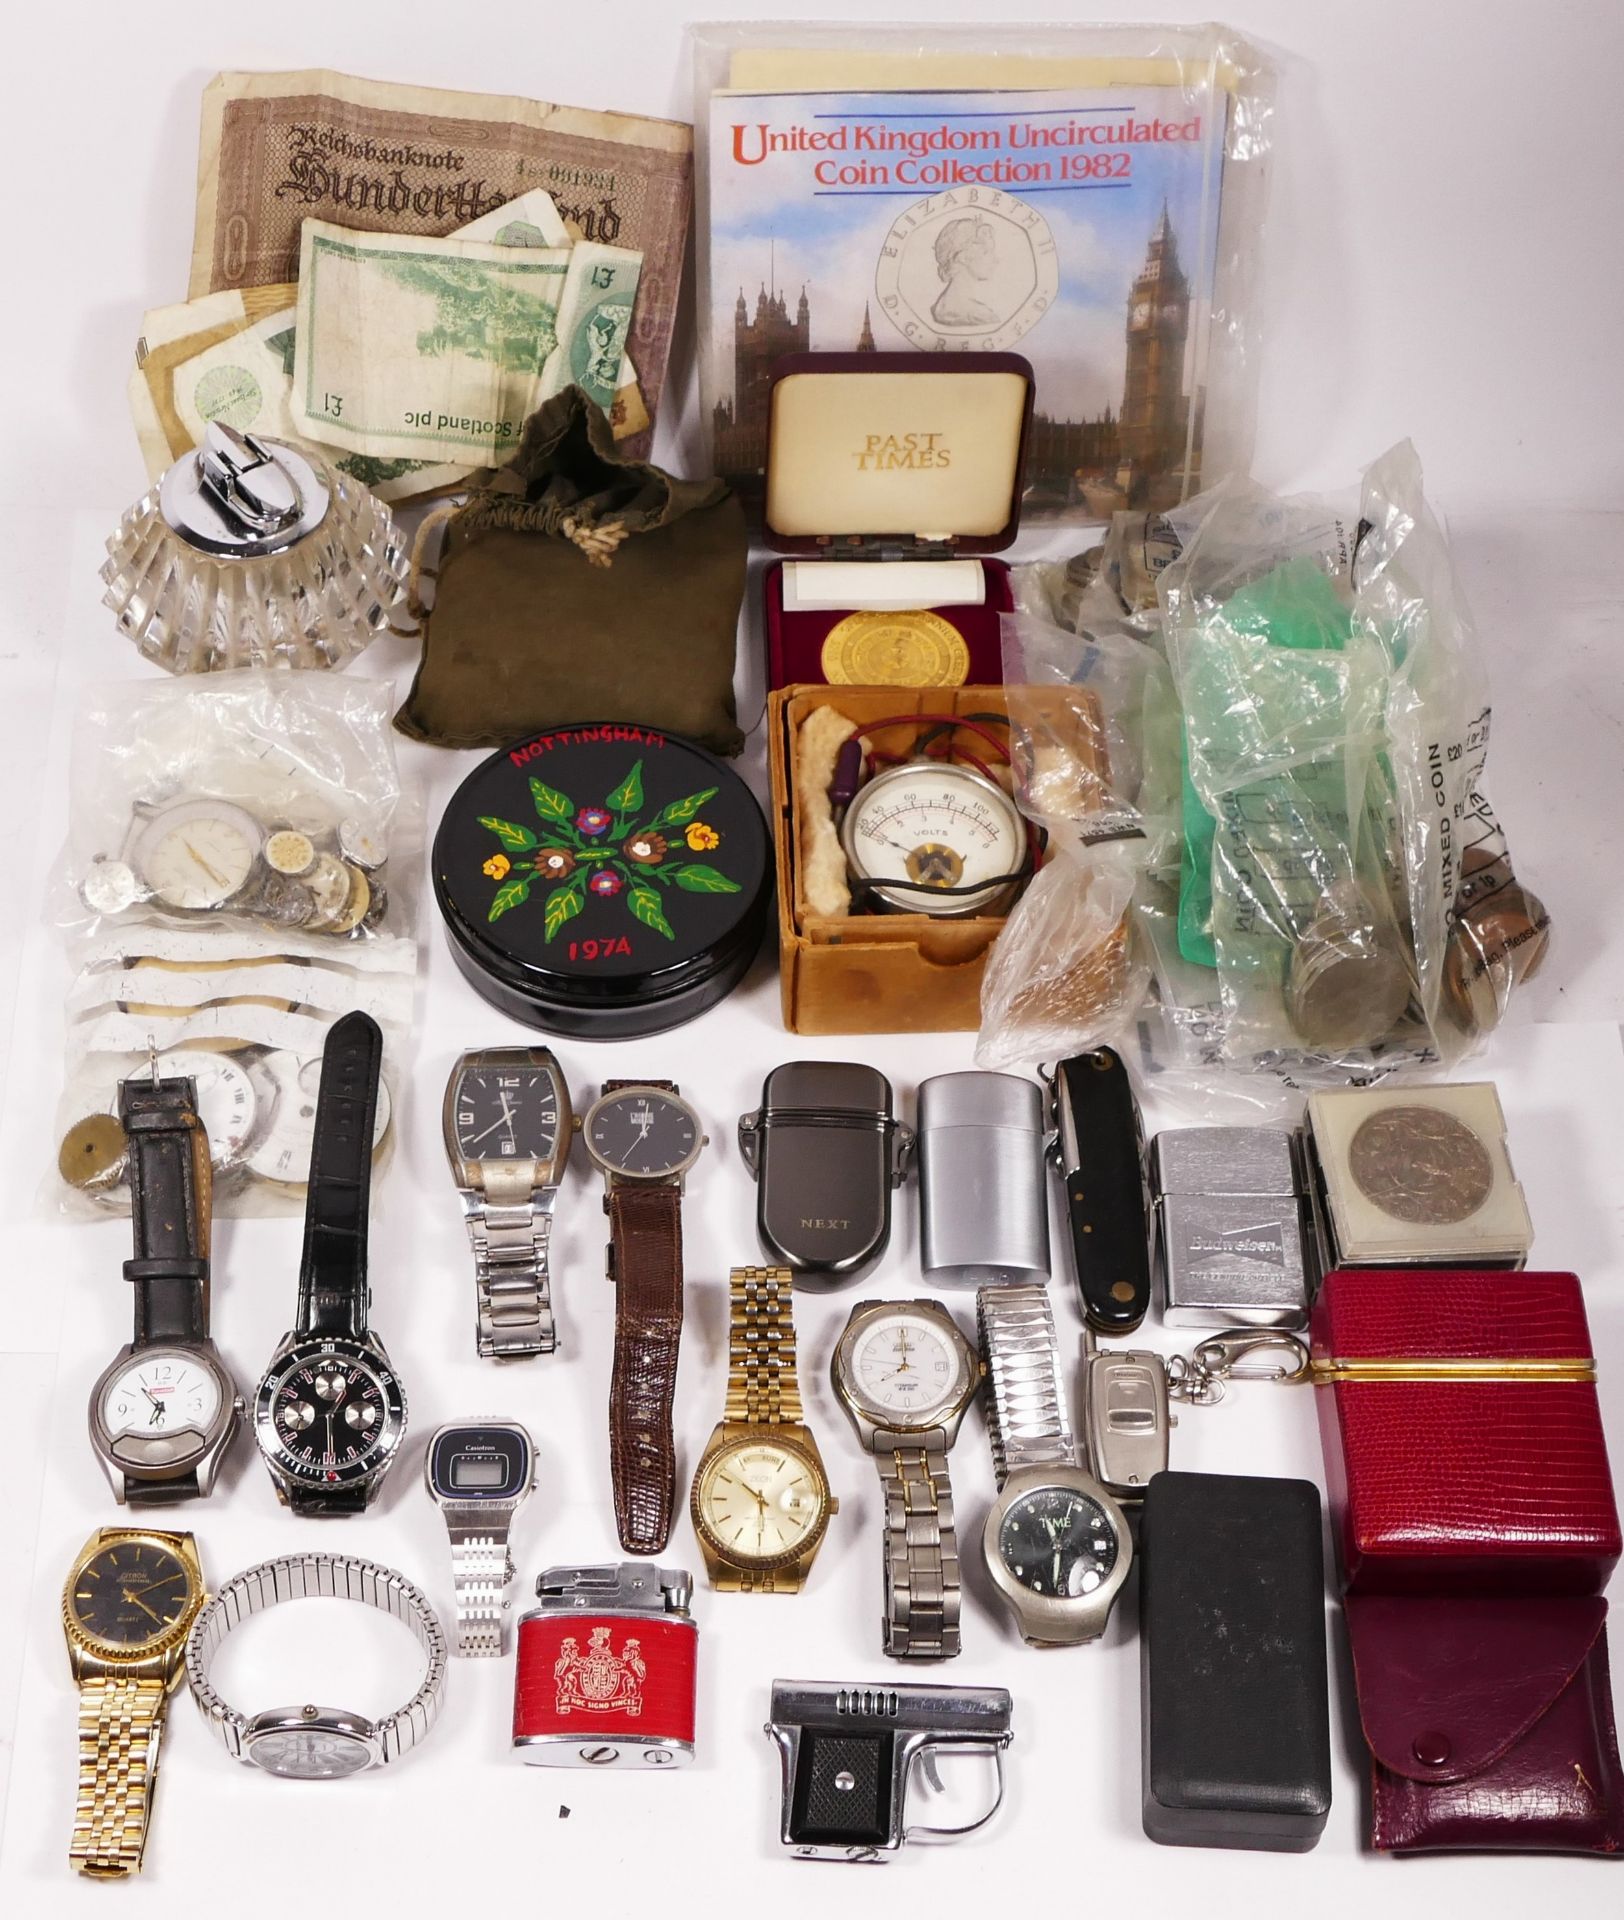 A collection of quartz fashion wristwatches, cigarette lighters and English and Overseas ex